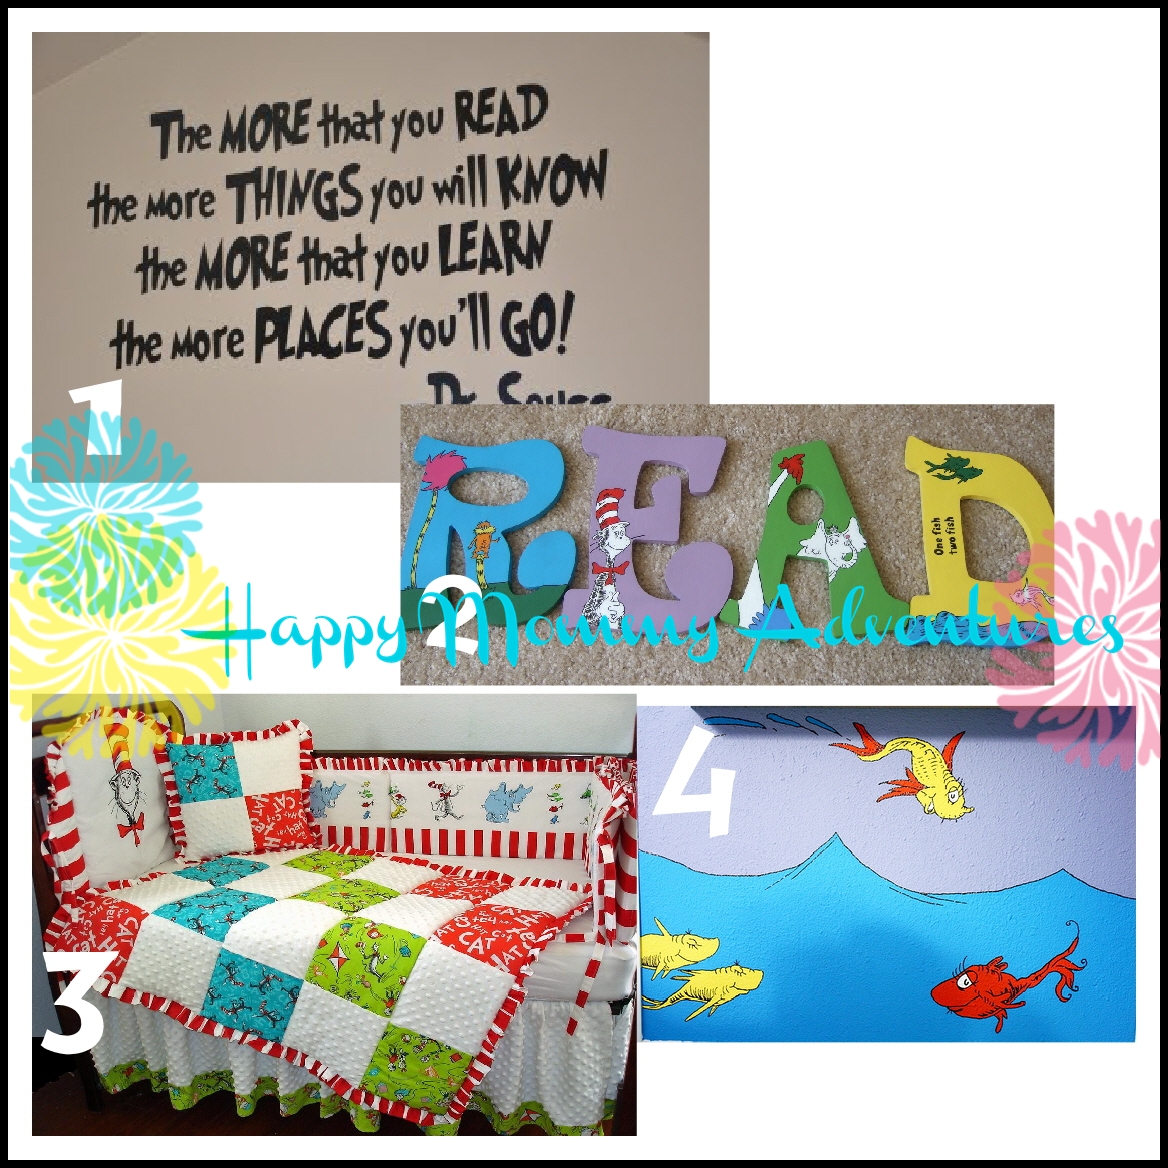 Dr. Seuss Excerpt on a wall, Dr. Seuss-inspired READ wooden letter ...